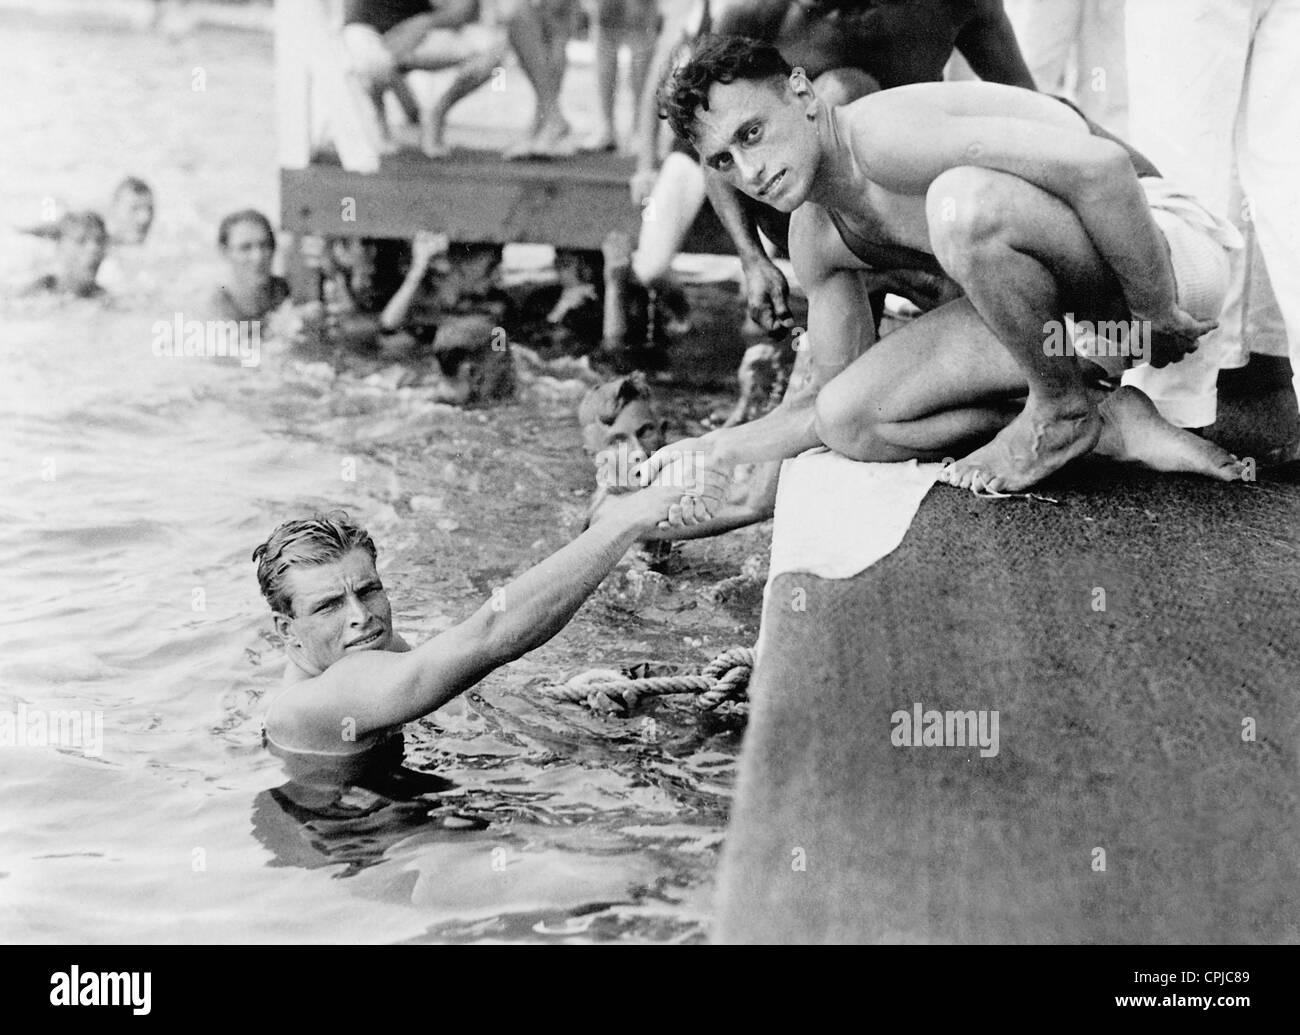 Buster Crabbe, director of water sports at the Concord Hotel, Kiamesha  Lake, New York, 1956 Stock Photo - Alamy